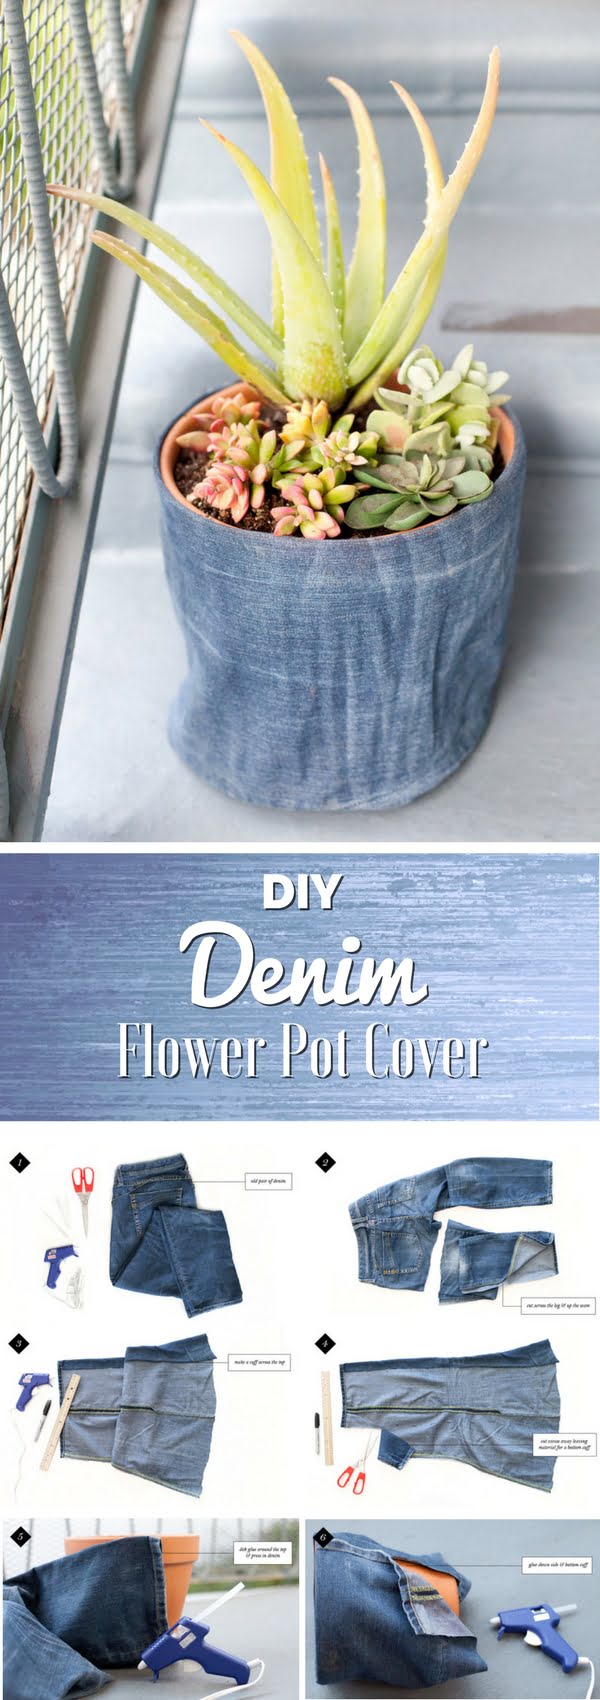 Check out the tutorial on how to make a DIY decorative flower pot cover from old jeans 